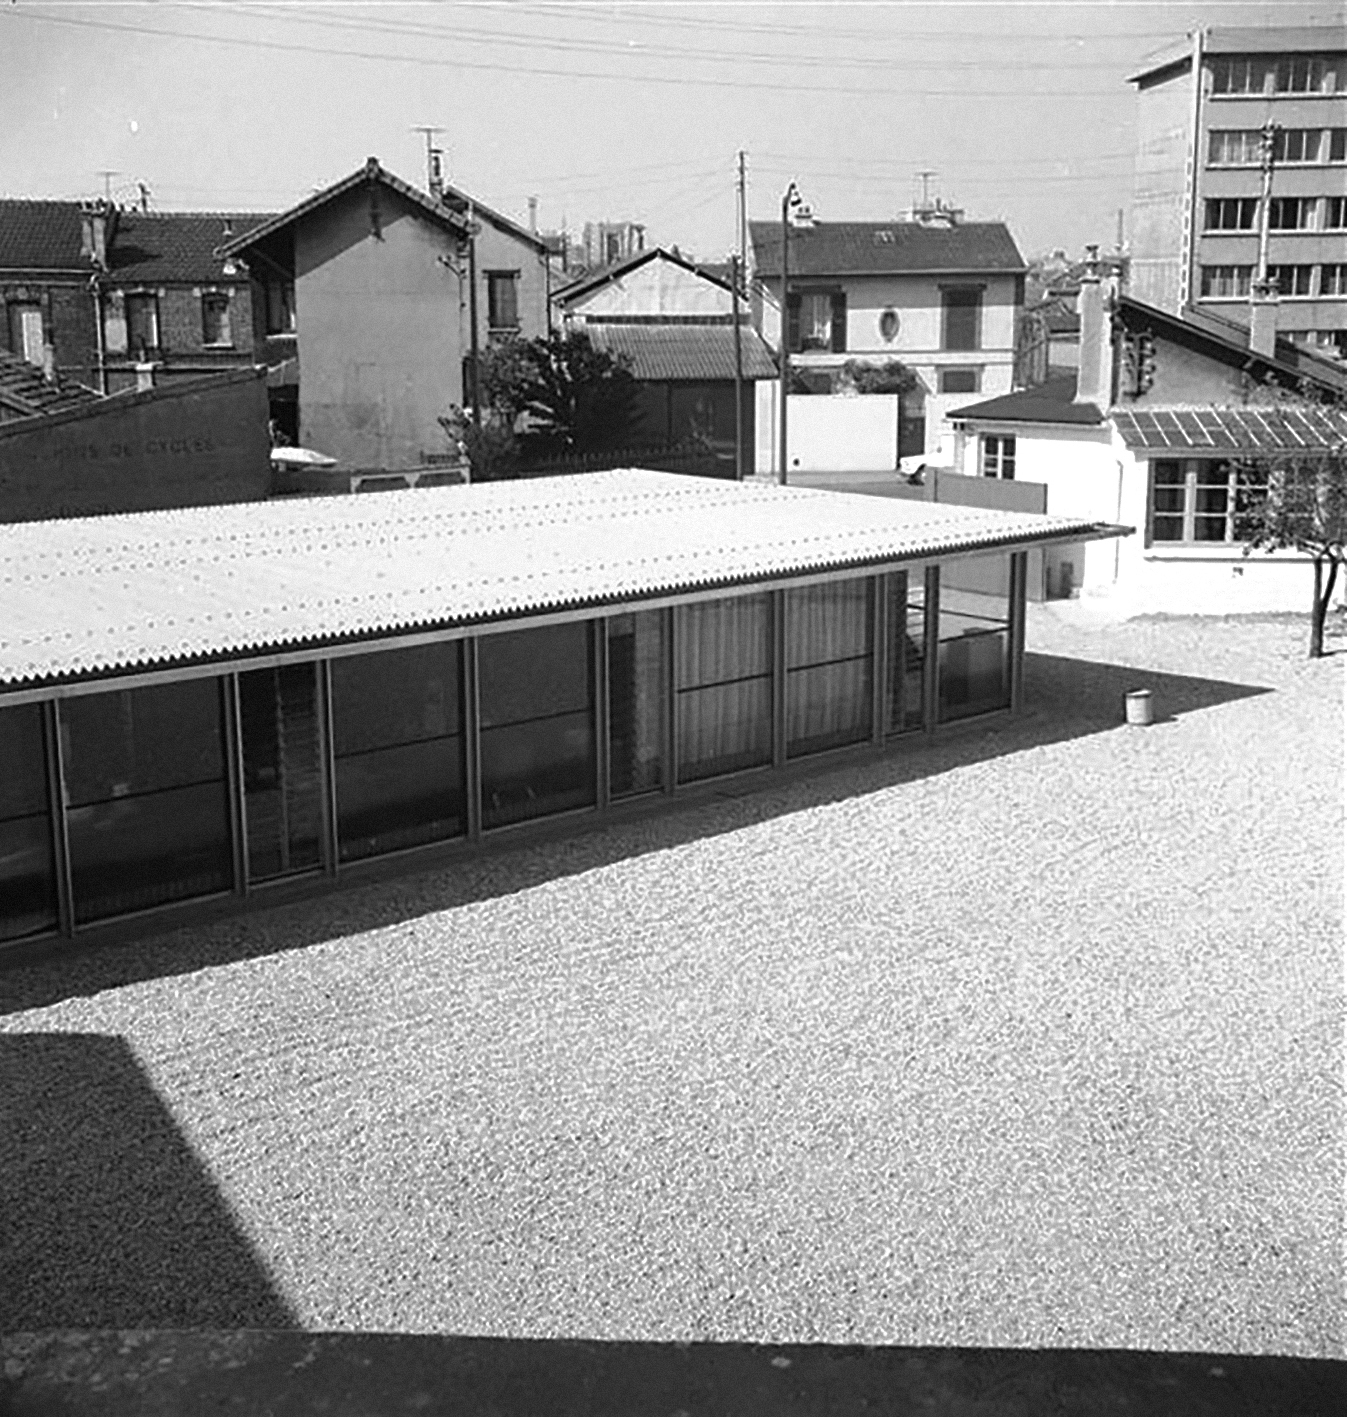 C.I.M.T. offices, Aubervilliers, 1961.